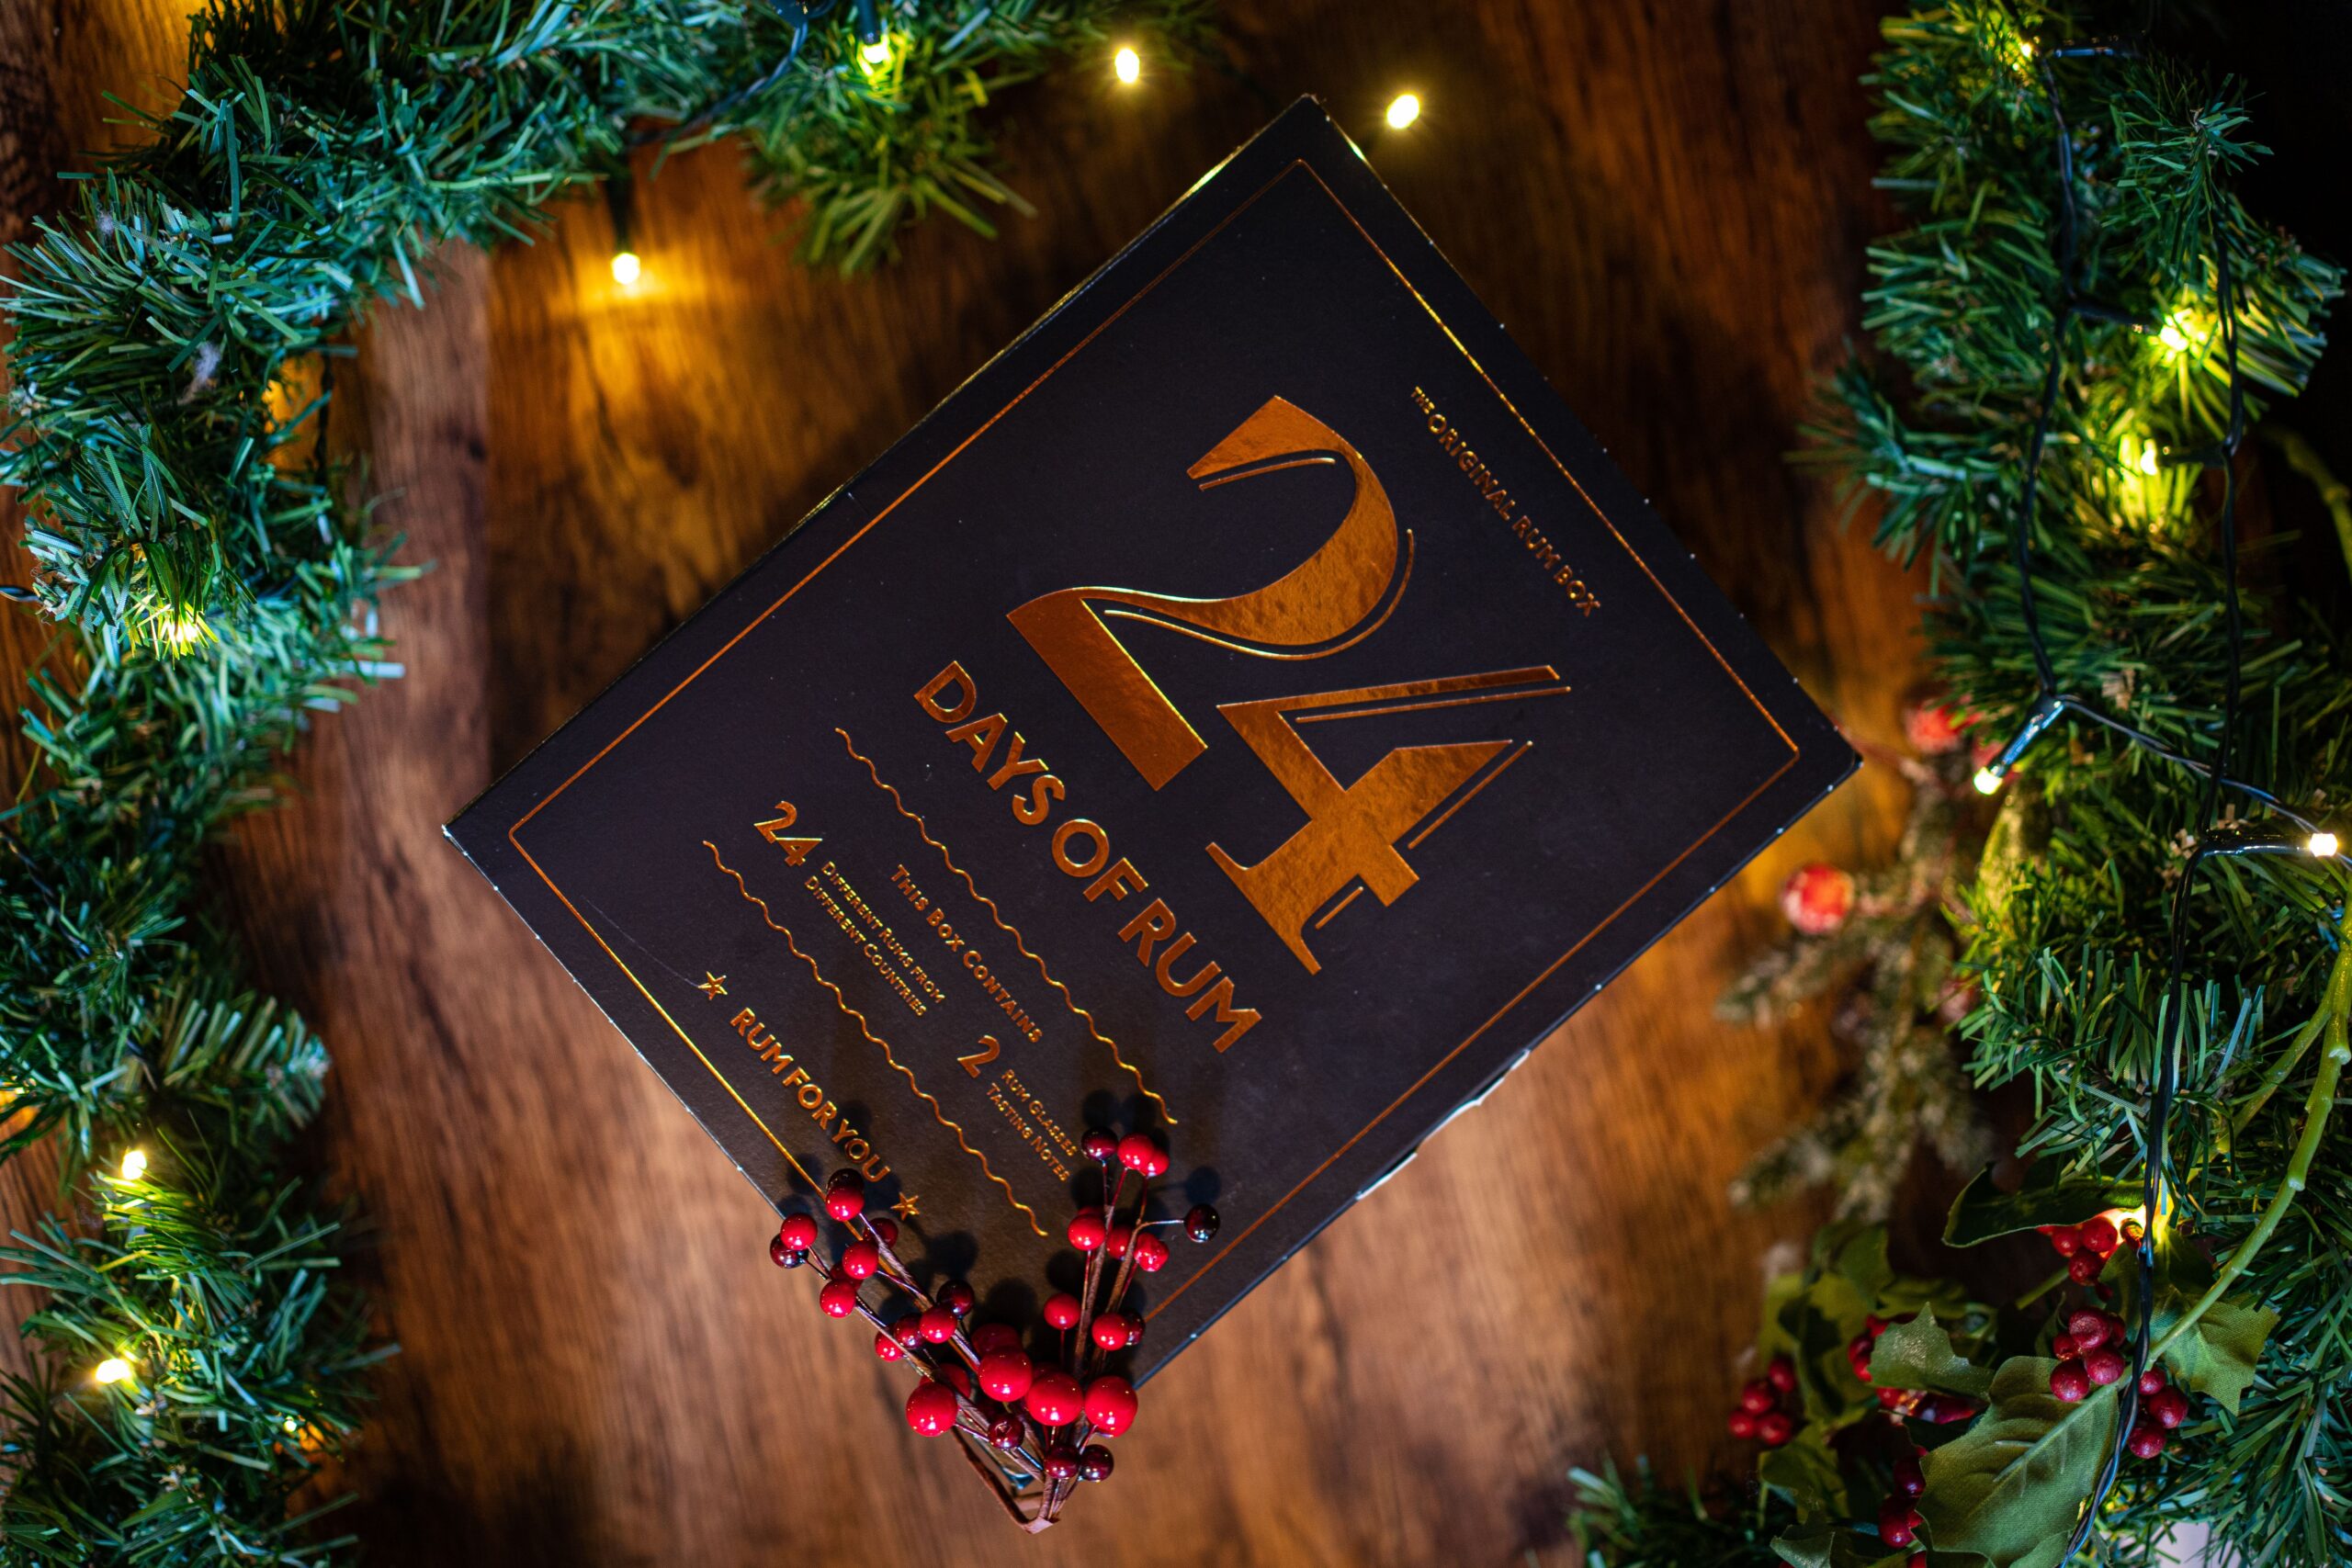 The 24 Days of Rum Advent Calendar is a luxurious collection of 24 x 20ml miniature rums from 24 different countries